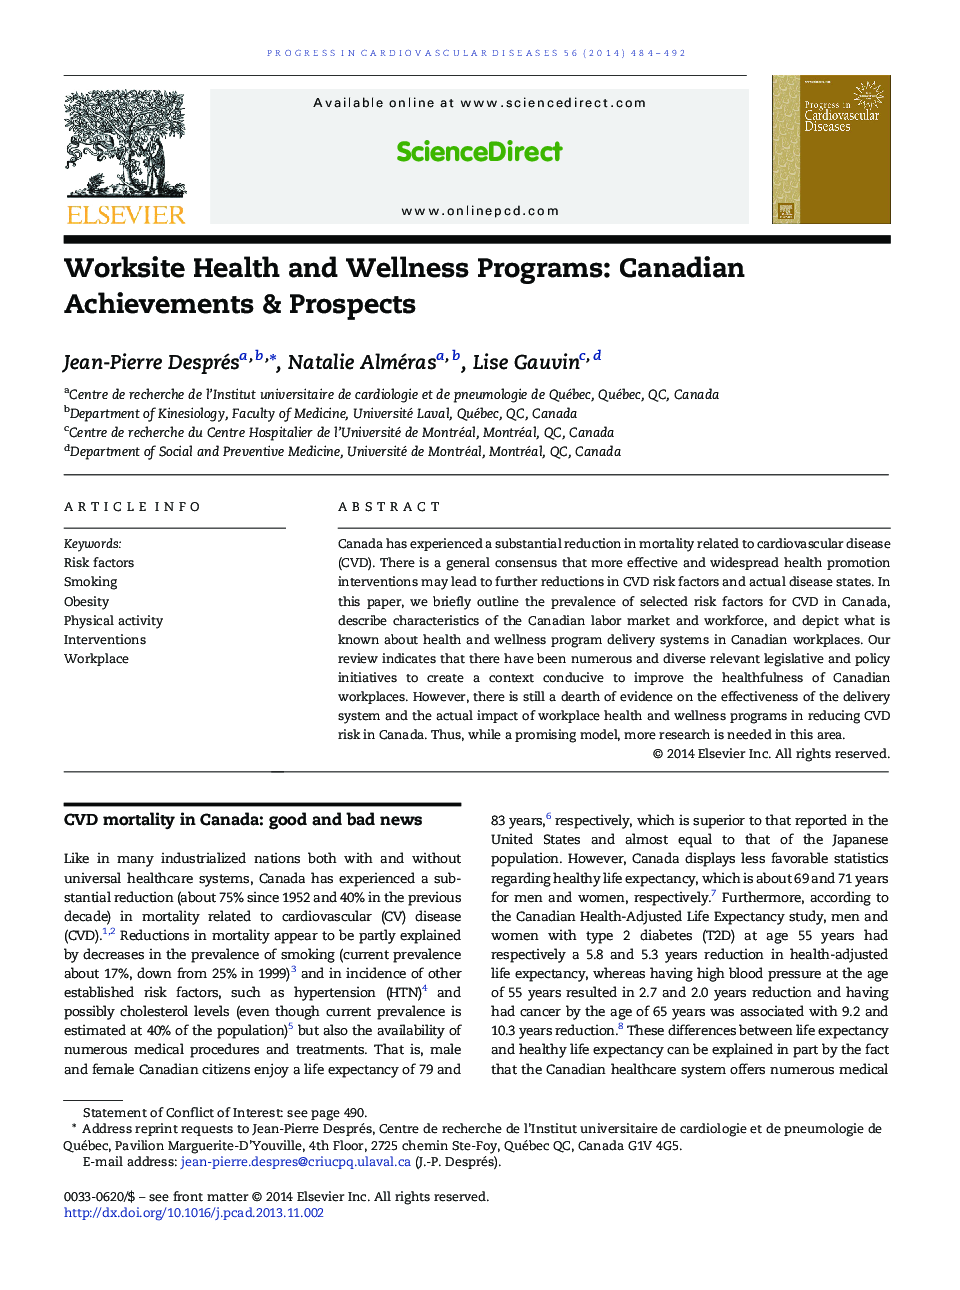 Worksite Health and Wellness Programs: Canadian Achievements & Prospects